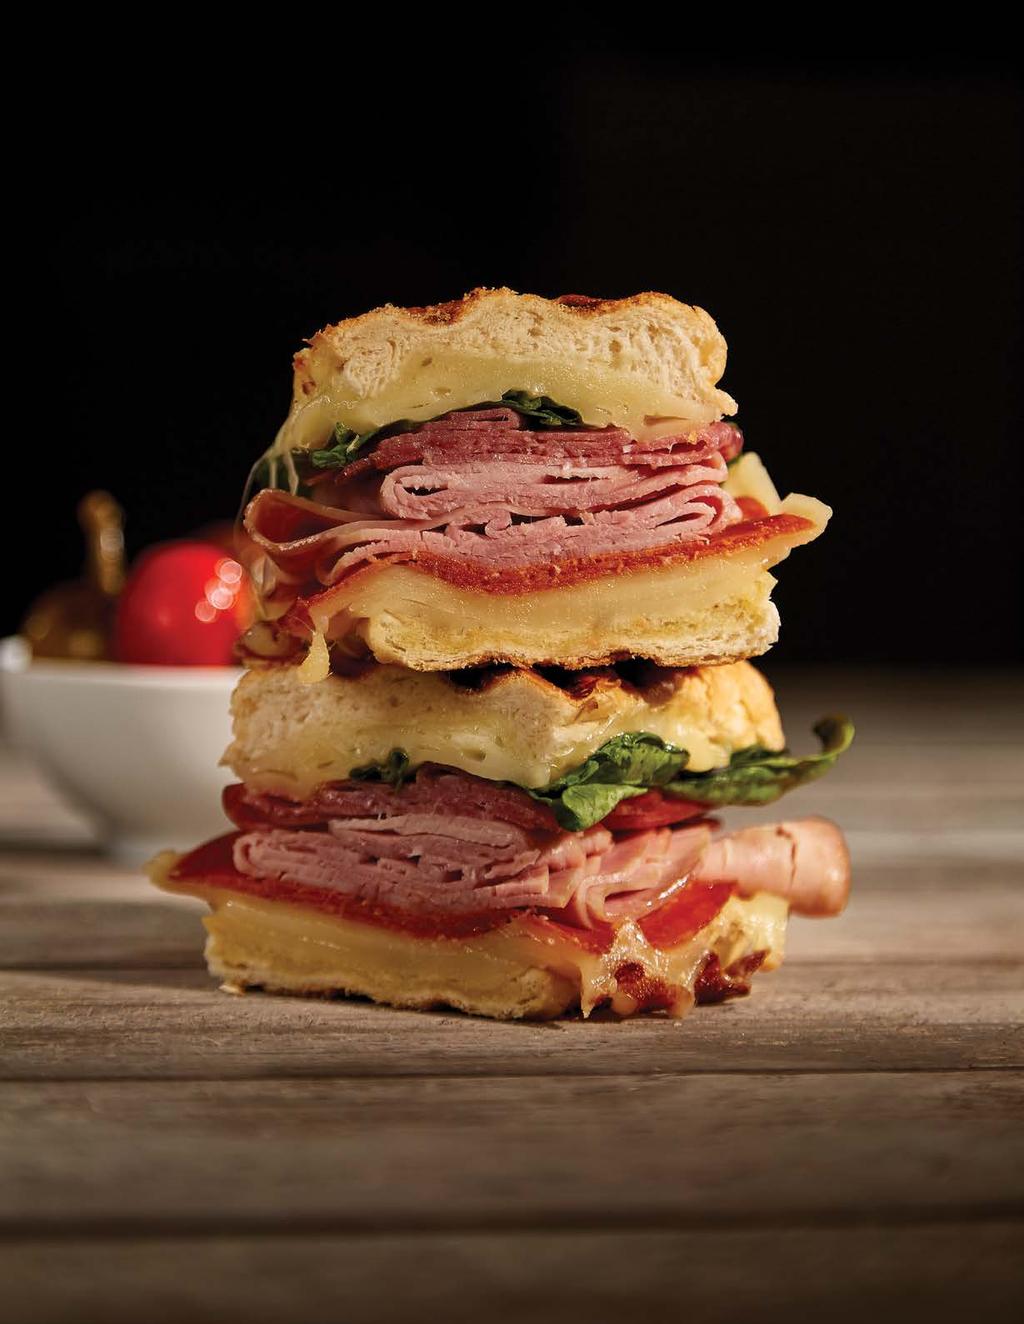 SERVES 2 2 hoagie rolls, sliced in half lengthwise ¼ cup margarine ½ cup baby spinach 8 slices tomatoes, thin ¼ lb. pepperoni, sliced ¼ lb. salami, sliced ¼ ham, sliced ¼ lb.